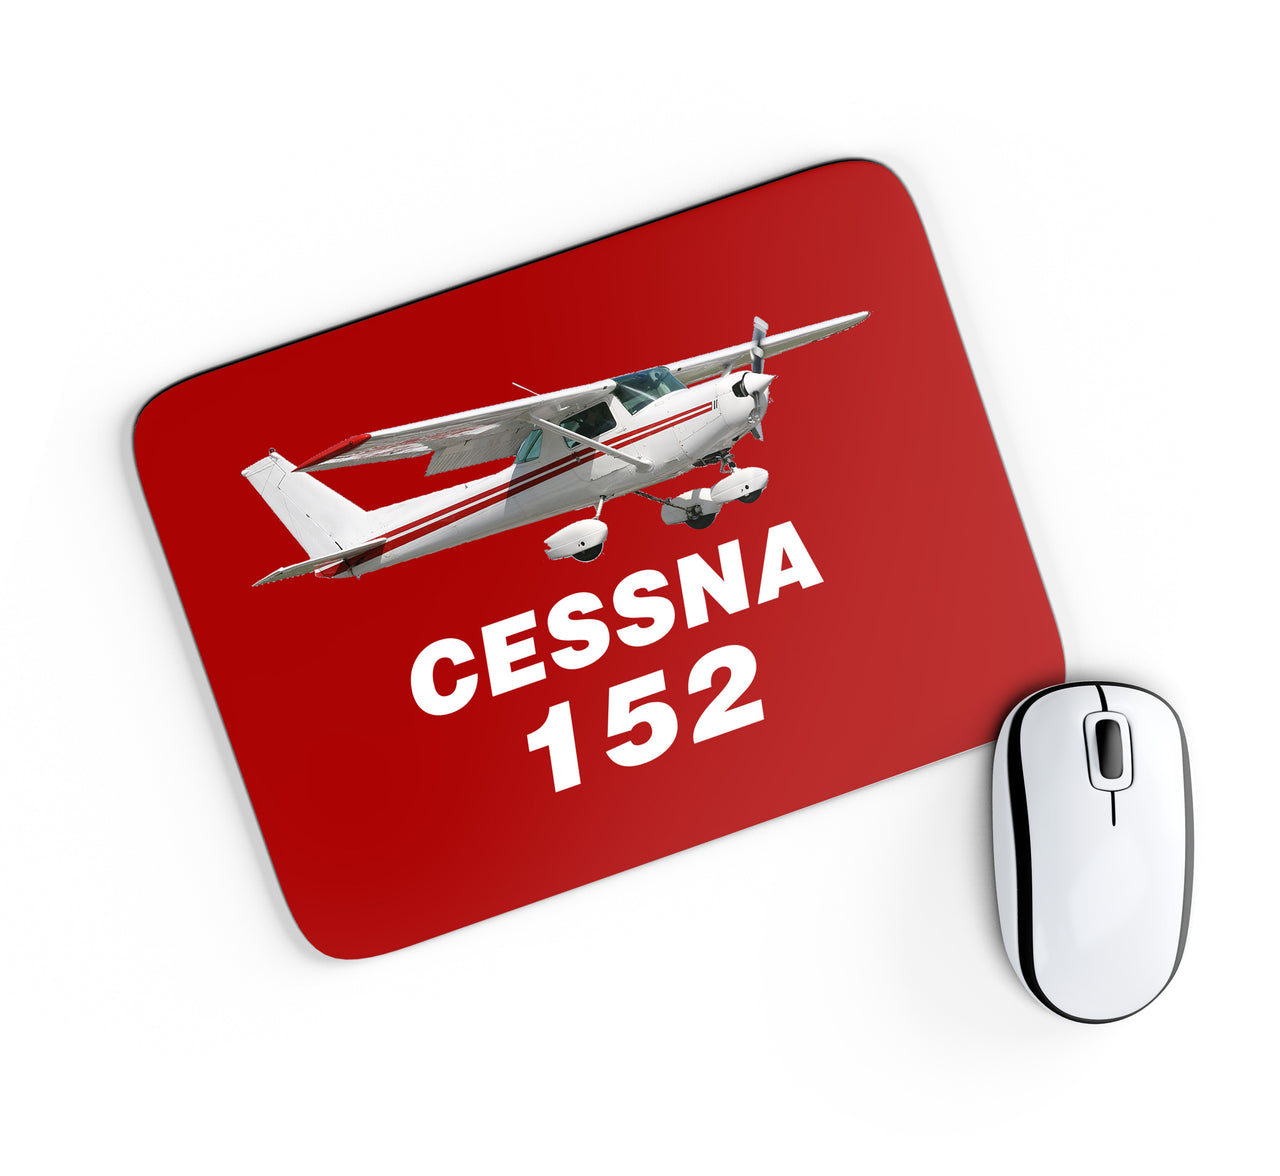 The Cessna 152 Designed Mouse Pads